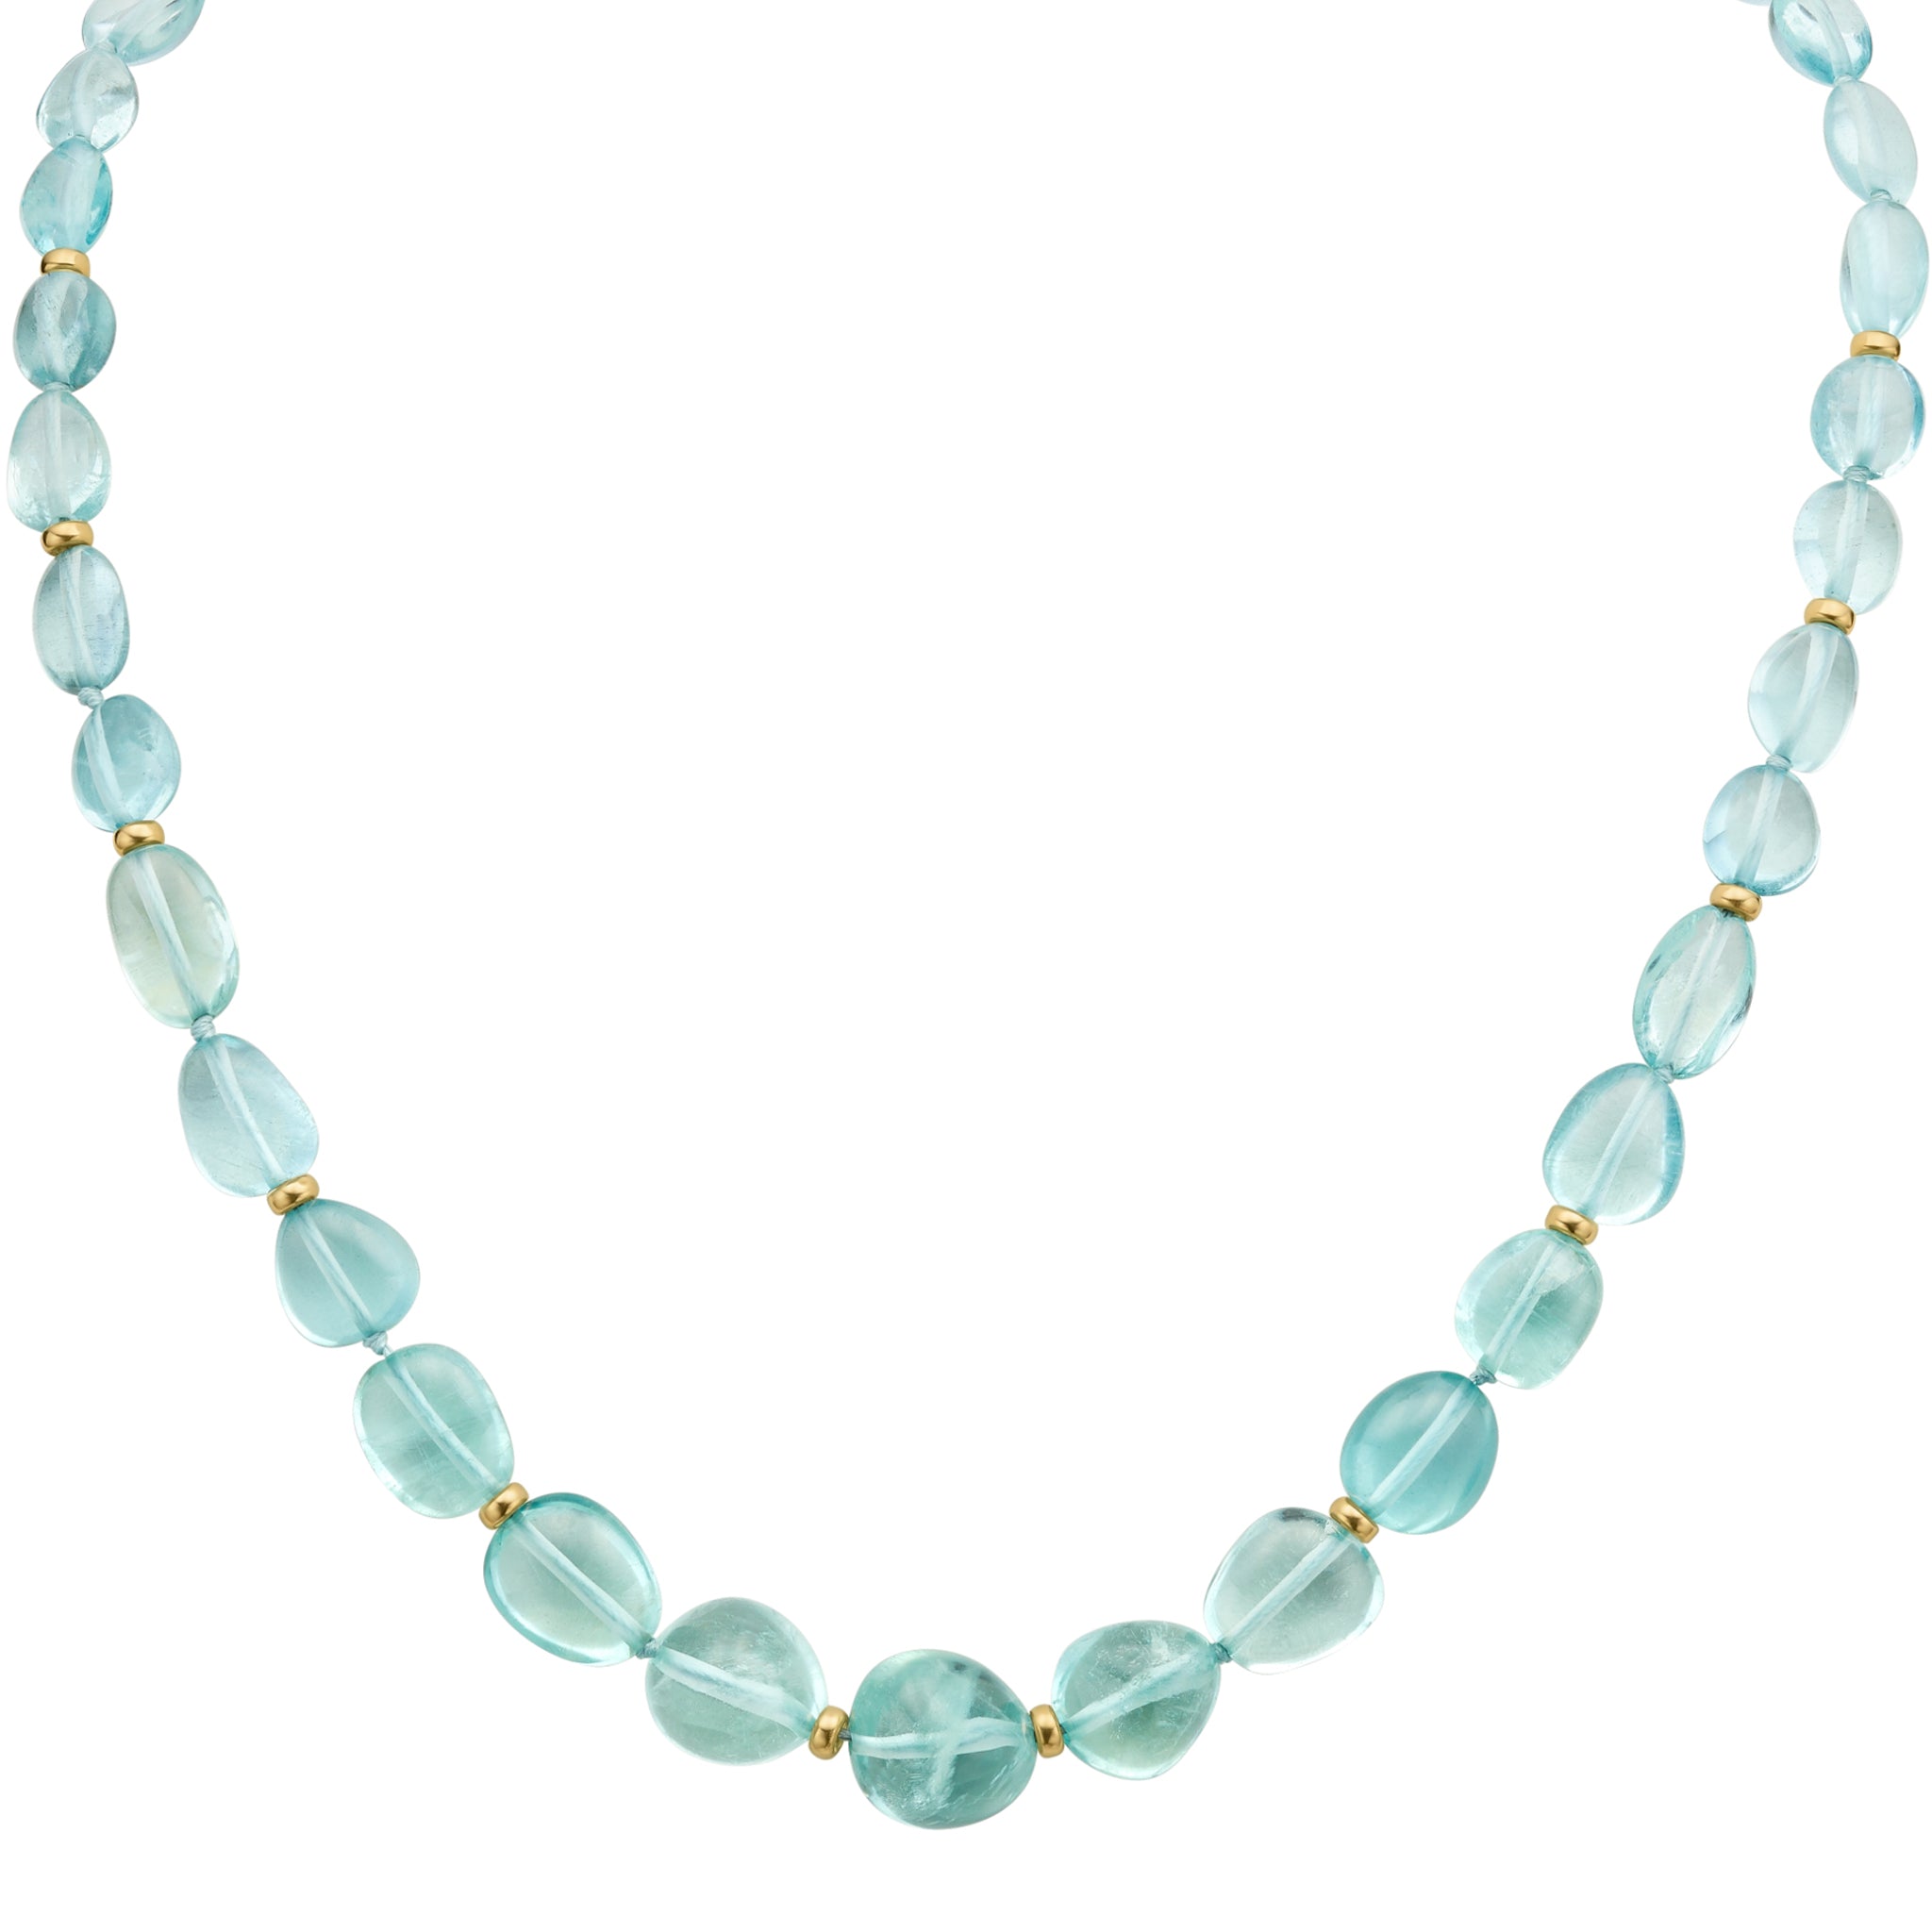 Aquamarine Bead and Gold Rondelle Necklace